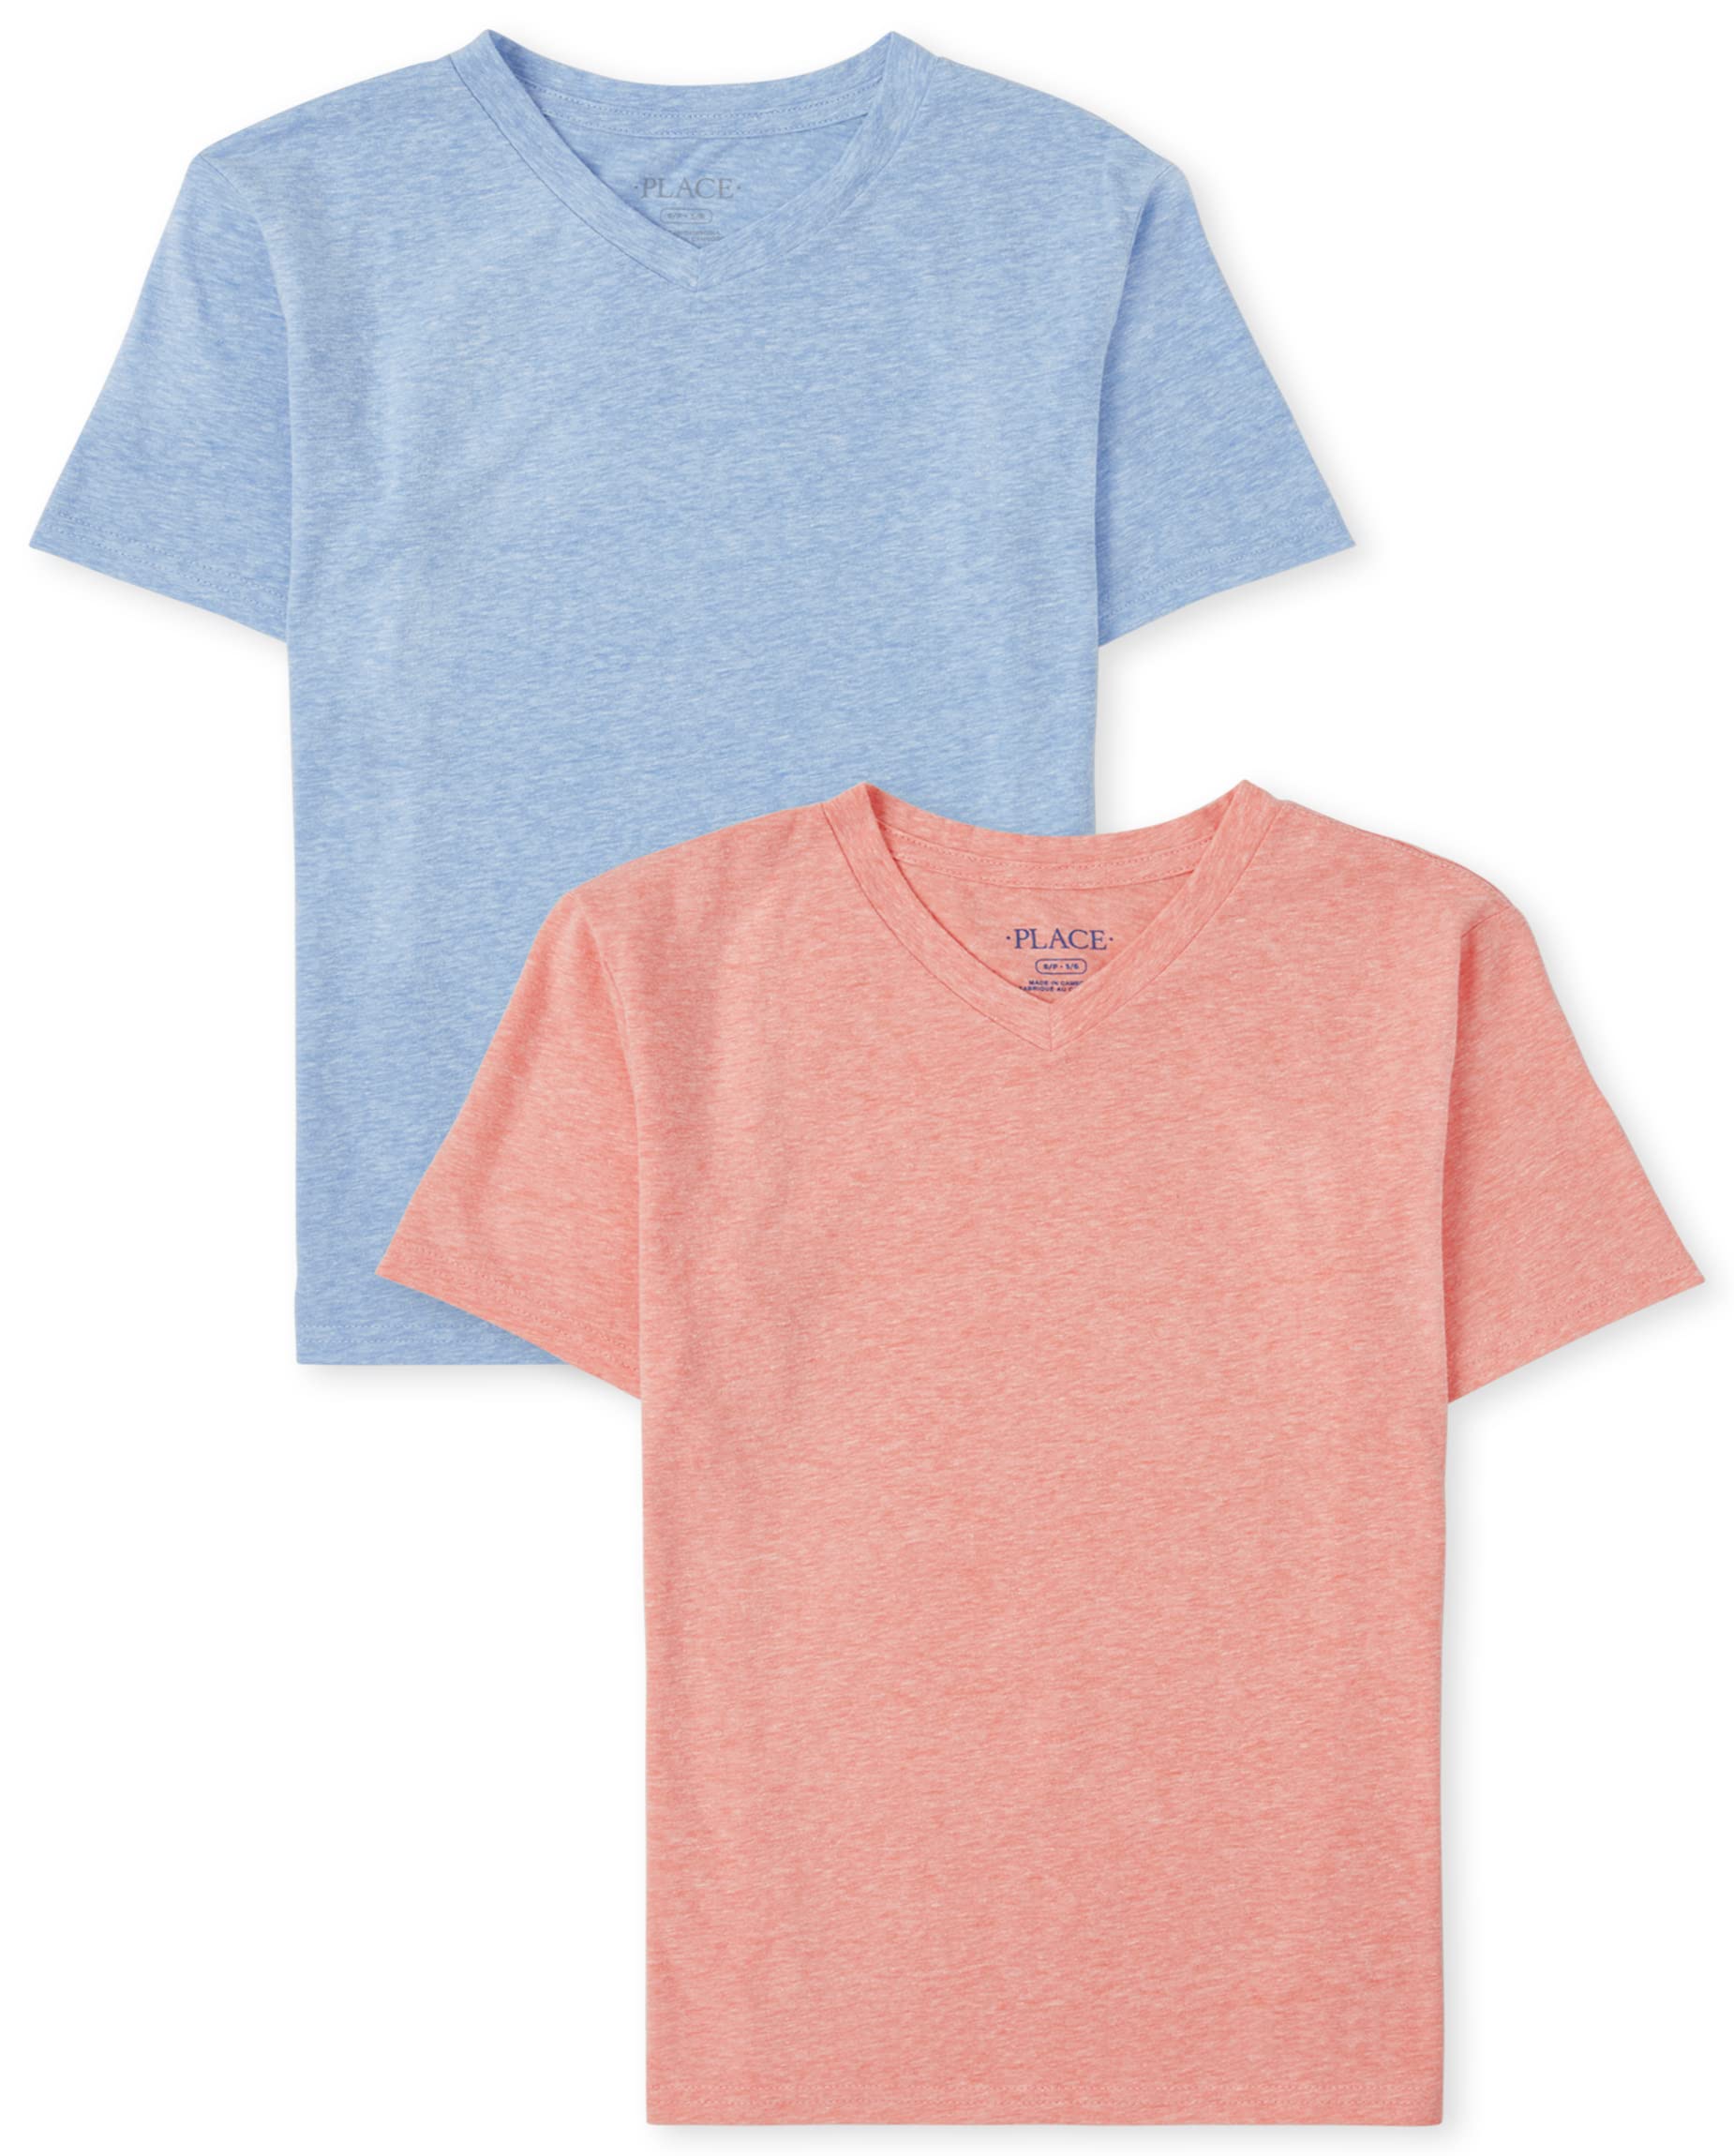 The Children's Place 2 Pack Boys V-Neck Top 2-Pack